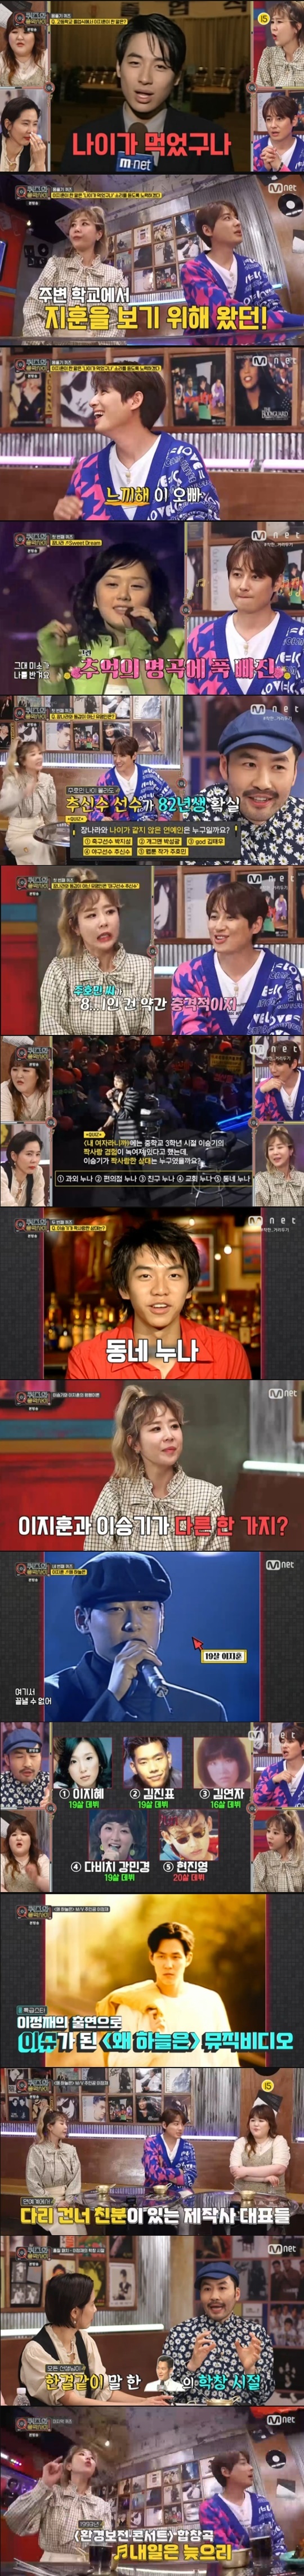 Lee Ji-hoon returns to his debut days and unravels quizIn Mnet Between Quiz and Music (hereinafter referred to as Trivia Description), Singer Lee Ji-hoon, who is actively working as a musical actor, appeared as a guest and started quiz solving with Quisa 2 Broke Girls Shin Ji, Kim Na Young, and Lee Guk-ju.The first time on the day was Shi Chonggui, a body-raising quiz about Lee Ji-hoon.In an interview with Mnet at the time of high school graduation, he said he would try to hear Age ate as a college student.Noh Hong-chul said, Did not you come to see Ji Hoon in the surrounding school during your school days?Lee Ji-hoon replied, What are you doing? And laughed.The second was Shi Chonggui, an actor and singer Jang Na-ra-related quizze who worked in the same era as Lee Ji-hoon.Jang Na-ra and Age hit other people, and soccer player Park Ji-sung, comedian Park Sung-kwang, webtoon writer Ju Ho-min and god Kim Tae-woo were 81 years old, while baseball player Choo Shin-soo was 82 years younger than Jang Na-ra.Its shocking that Mr. Joo Ho-min is the same age as Mr. Jang Na-ra, Shin Ji said.A quiz related to singer and actor Lee Seung-gi, who made his debut in high school in 2004, was also Shi Chonggui.When Noh Hong-chul called him Singer, a solo man connecting Lee Ji-hoon, Shin Ji explained, Lee Seung-gis My Girl is a song written by Psy.The performers watched the music video of My Girl, which contains Lee Seung-gis autobiographical story, and sent a passion to the exciting Acting and Kissing of the heroine Kim Sarang.When Noh Hong-chul said, Lee Ji-hoon is called Lee Seung-gi these days, Lee Ji-hoon said, I was so good that I spread it.If there is one difference, Seunggi is smart. Shi Chonggui was a quiz related to Lee Ji-hoons debut song Why Heaven and Singer, who did not debut in his teens, along with music video videos.Lee Ji-hoon said, I made my debut at the second time. He speculated that he would have made his debut at the age of 20 at the shop Lee Ji-hye.The rest of Lee Ji-hye, Kim Jin-pyo, Kim Yeon-ja and Kang Min-kyung all made their debut at 19.Noh Hong-chul said, Why did not Lee Jung-jae appear in the music video of Why the Sky and become more of a topic? Lee Ji-hoon said, I do not know the producers well before.I was acquainted with the late Ha Yong-soo, who was a high school student and decided to appear, said Ha Yong-soo, a representative of our agency.I am collecting songs to make an album these days, and I would appreciate it if Lee Jung-jae appeared in the music video once more.Noh Hong-chul said, Lee Jung-jae is my senior high school. Private high schools dont change teachers.She said she slept every day in class, he said. Lee Jung-jae was a fitness team.Quisa2 Broke Girls laughed at Lee Jung-jae, saying, I think I was tired because I worked so hard.Choi Seung-hye